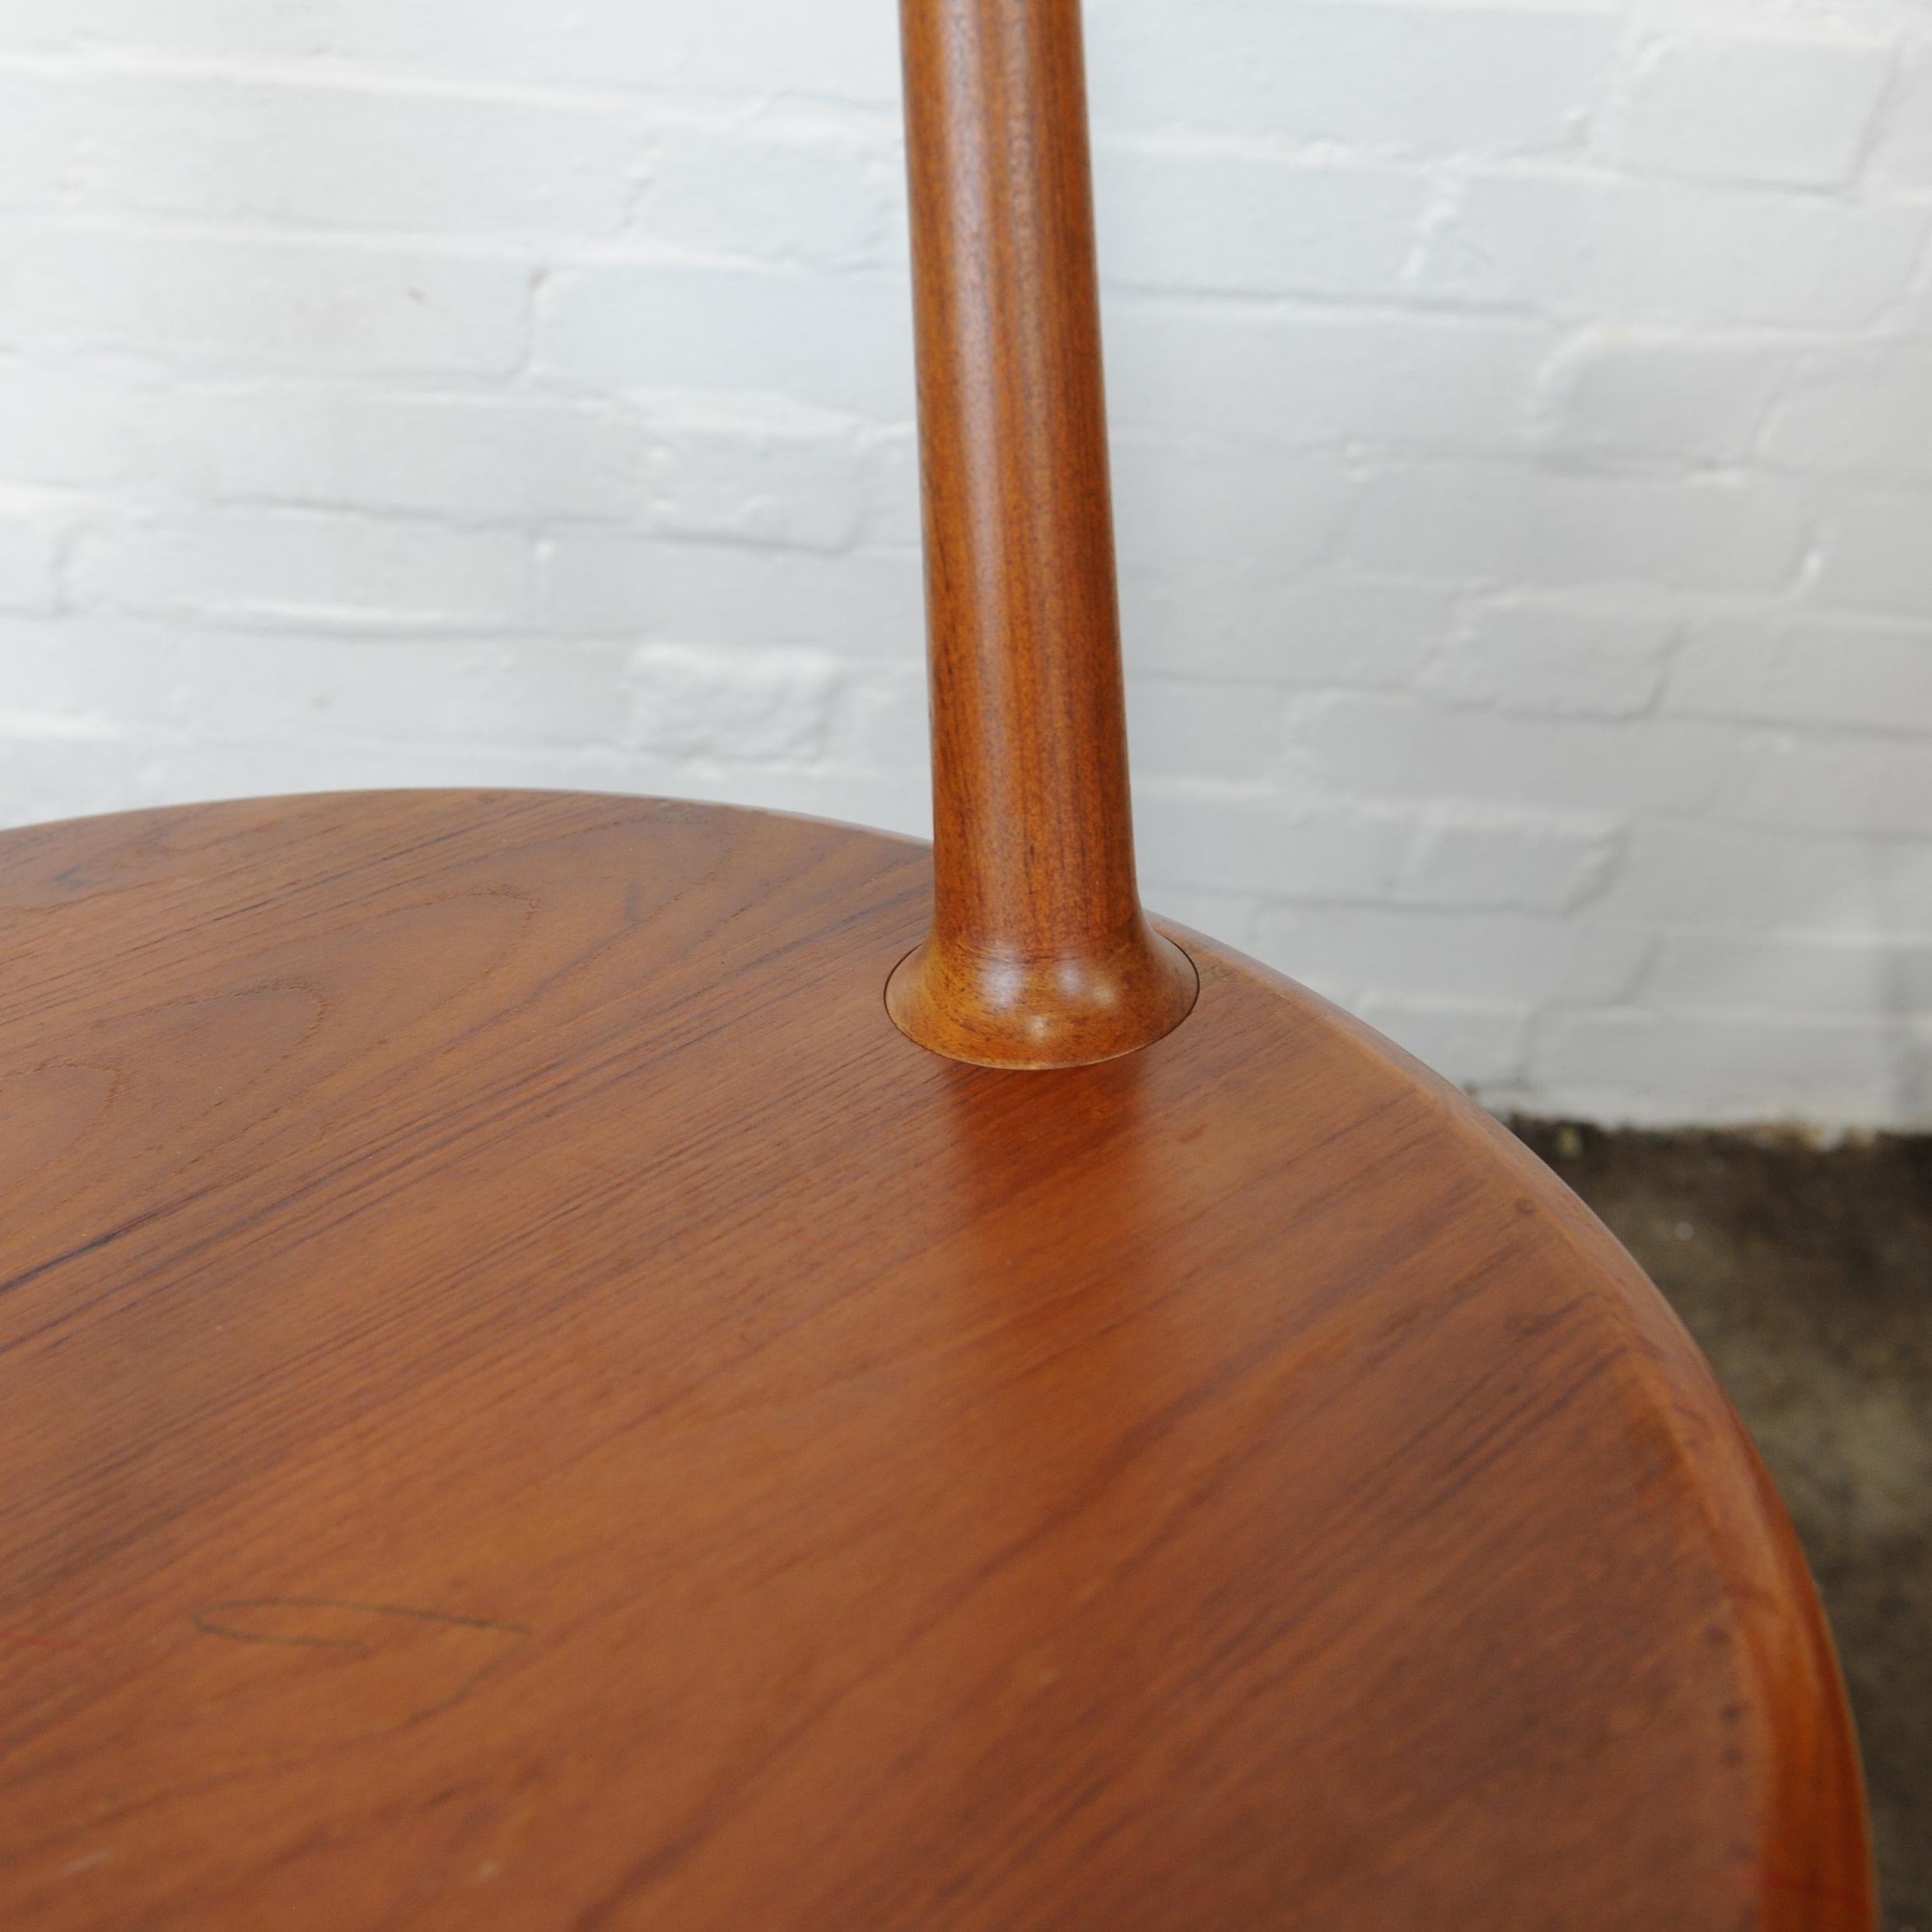 Round Teak Three Legged Coffee Table by Norsk Design Ltd, 1960s For Sale 5